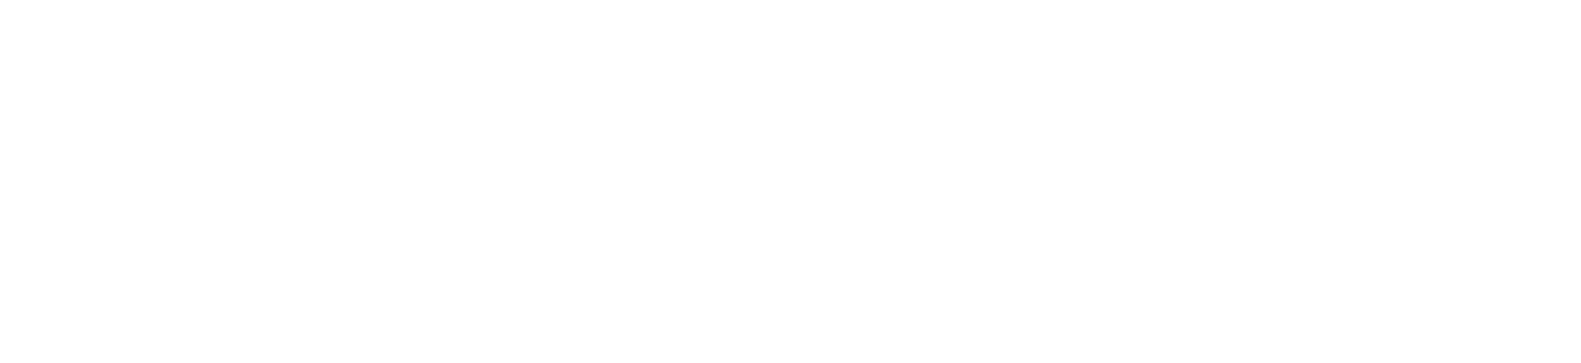 Eastern Province Cement Company logo large for dark backgrounds (transparent PNG)